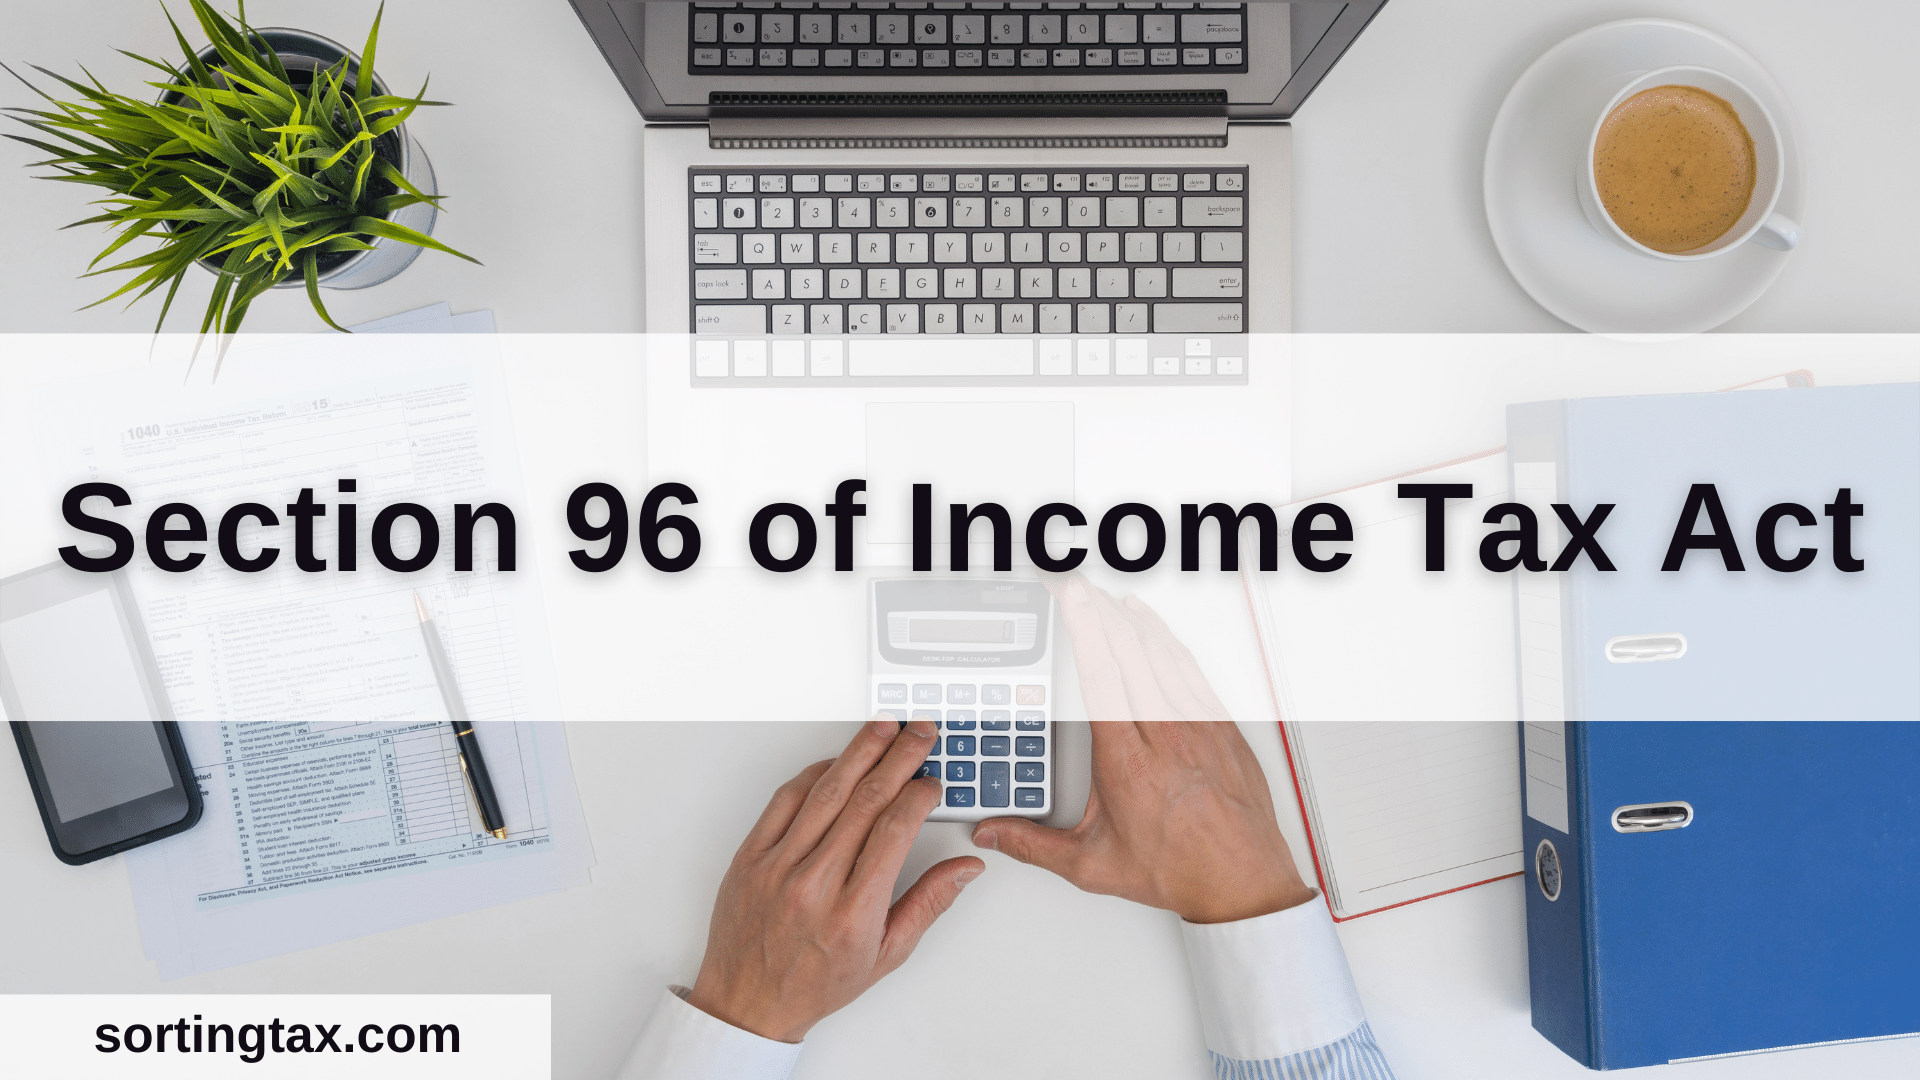 Section 96 of Income Tax Act